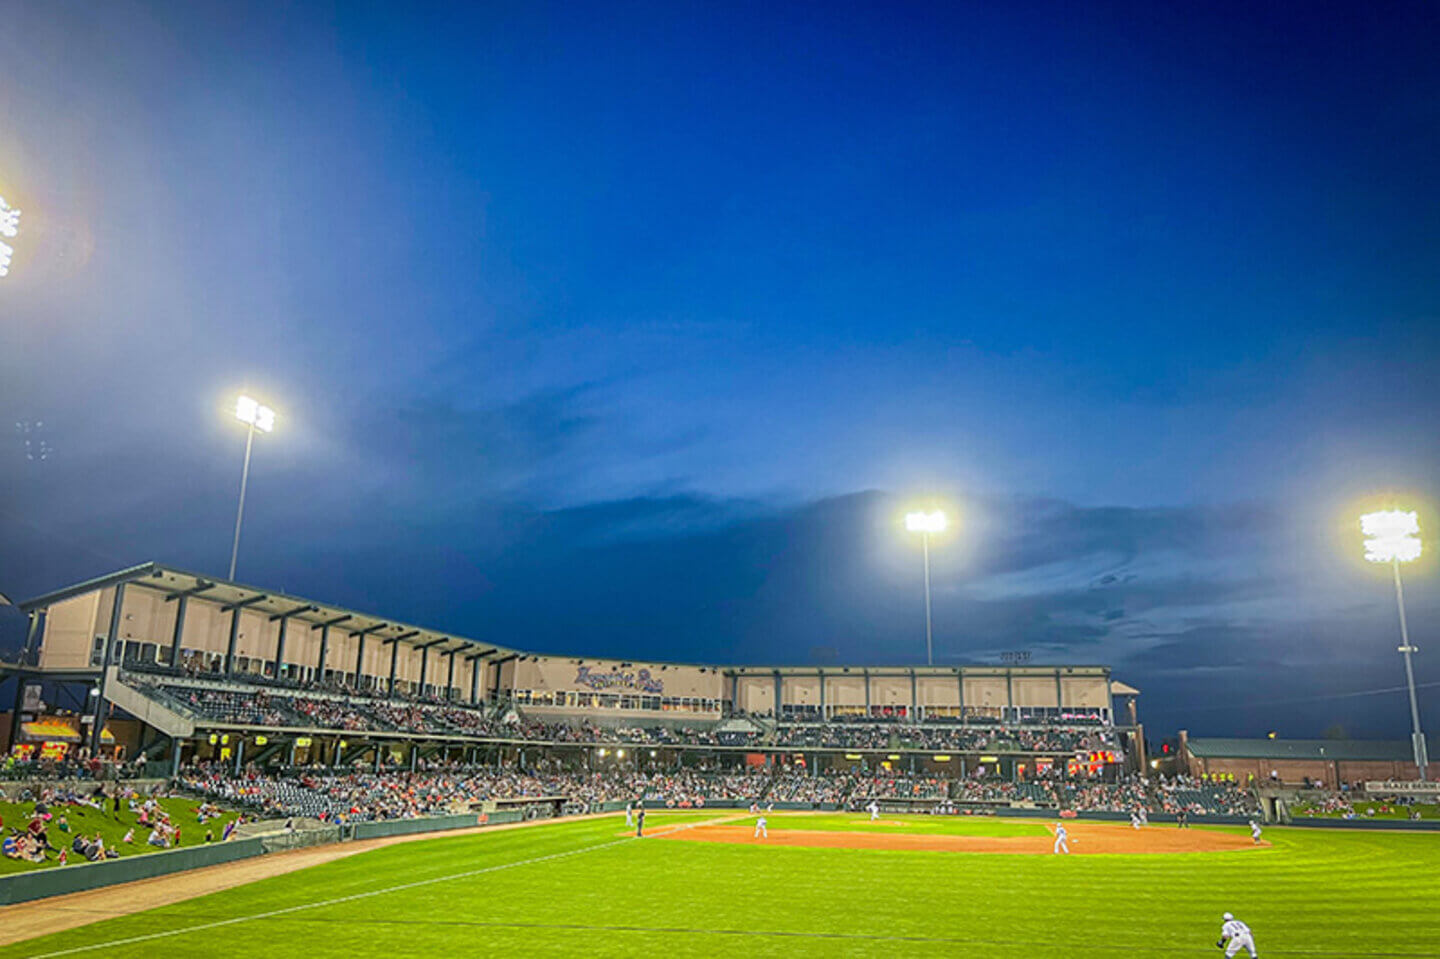 Haymarket Park Baseball Stadium during a night game from the outfield.